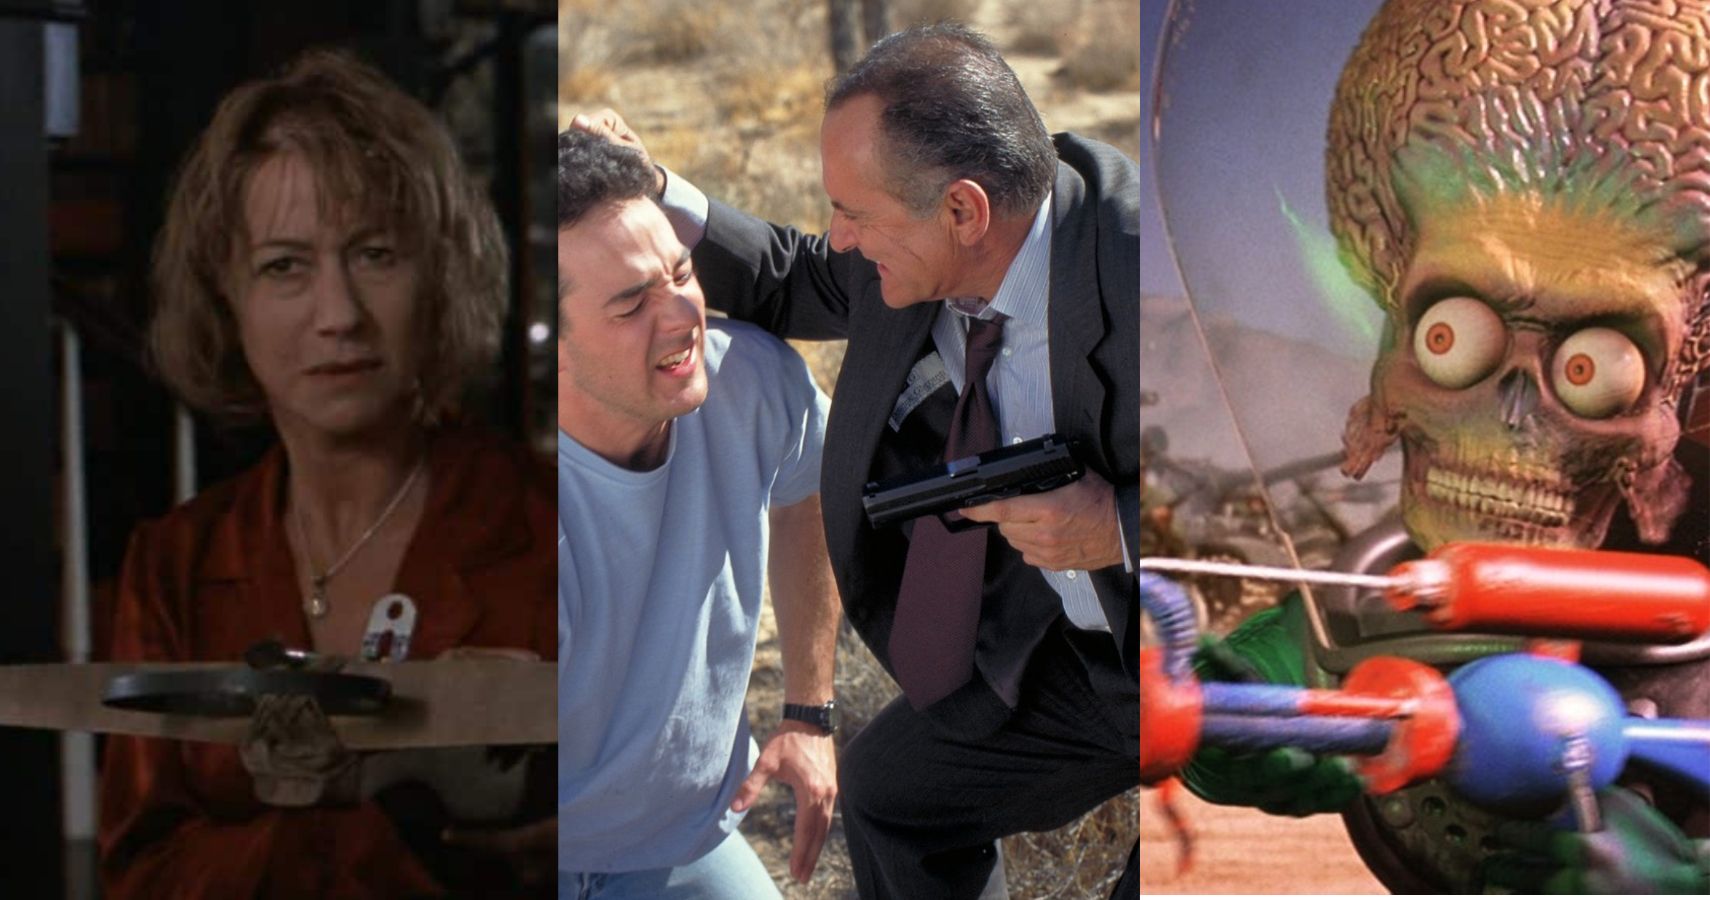 A combined image featuring scenes from several 90's comedies including Teaching Mrs. Tingle, 8 Heads in a Duffle Bag and Mars Attacks respectively.